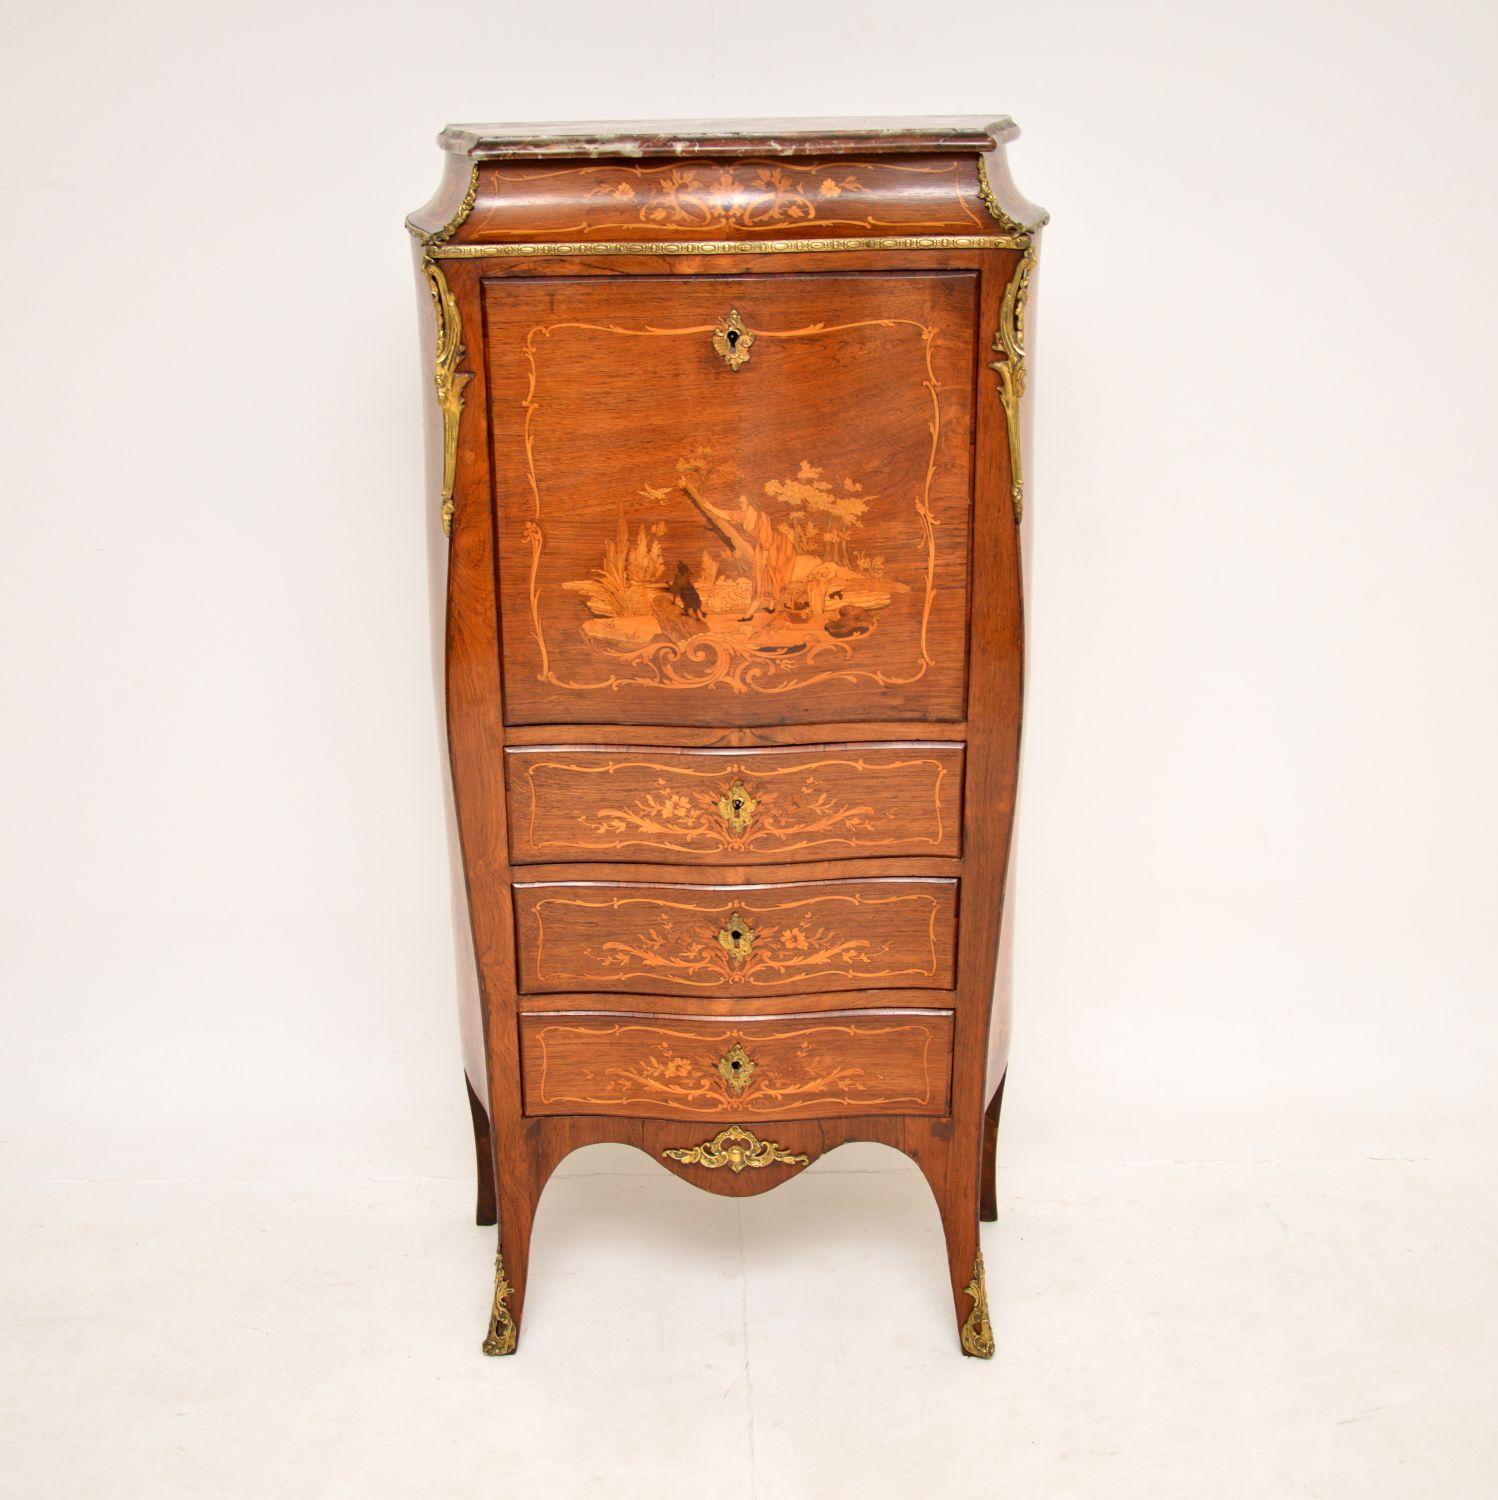 A stunning antique bombe shaped French secretaire chest with an original rouge marble top and pull down writing surface. This was made in France and dates from around the 1890-1900 period.

It is of amazing quality, and has gorgeous patterns